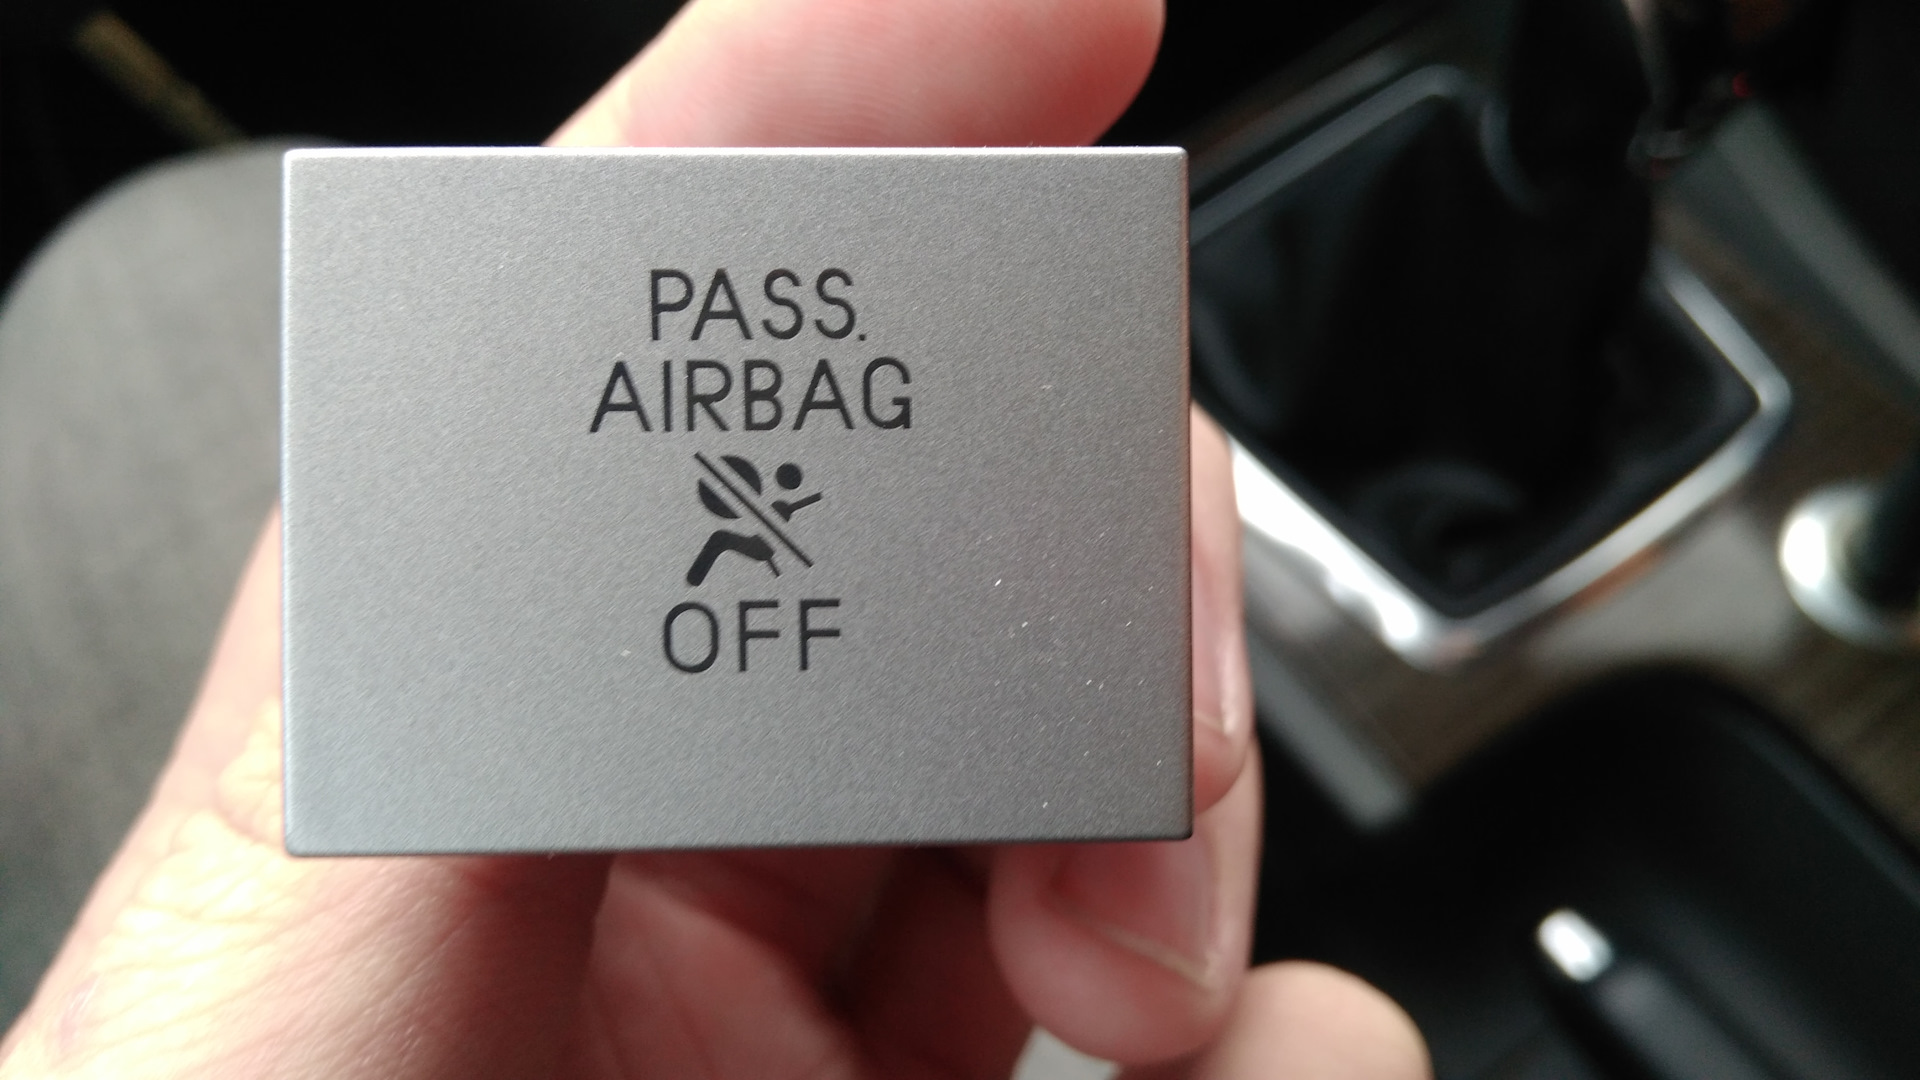 Airbag off